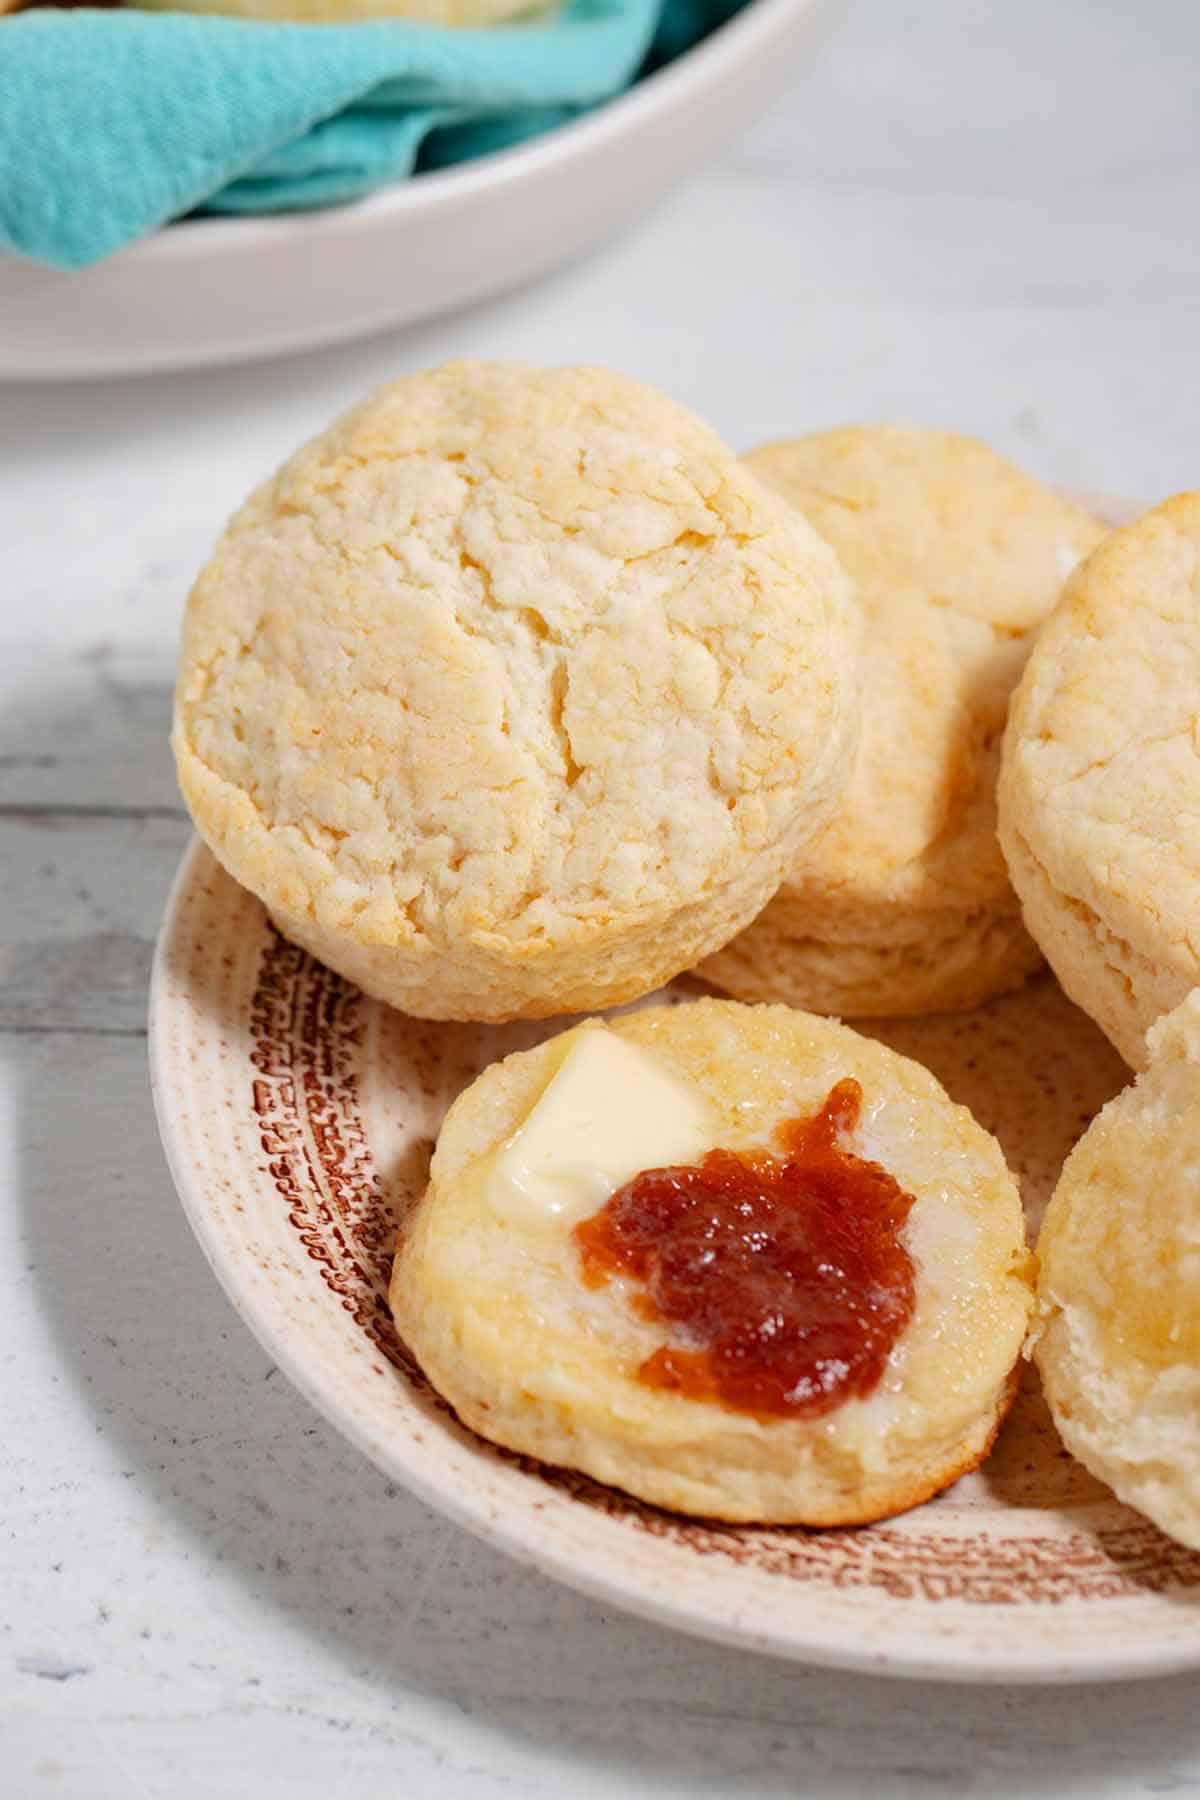 Plate of buttermilk biscuits made with pancake mix.